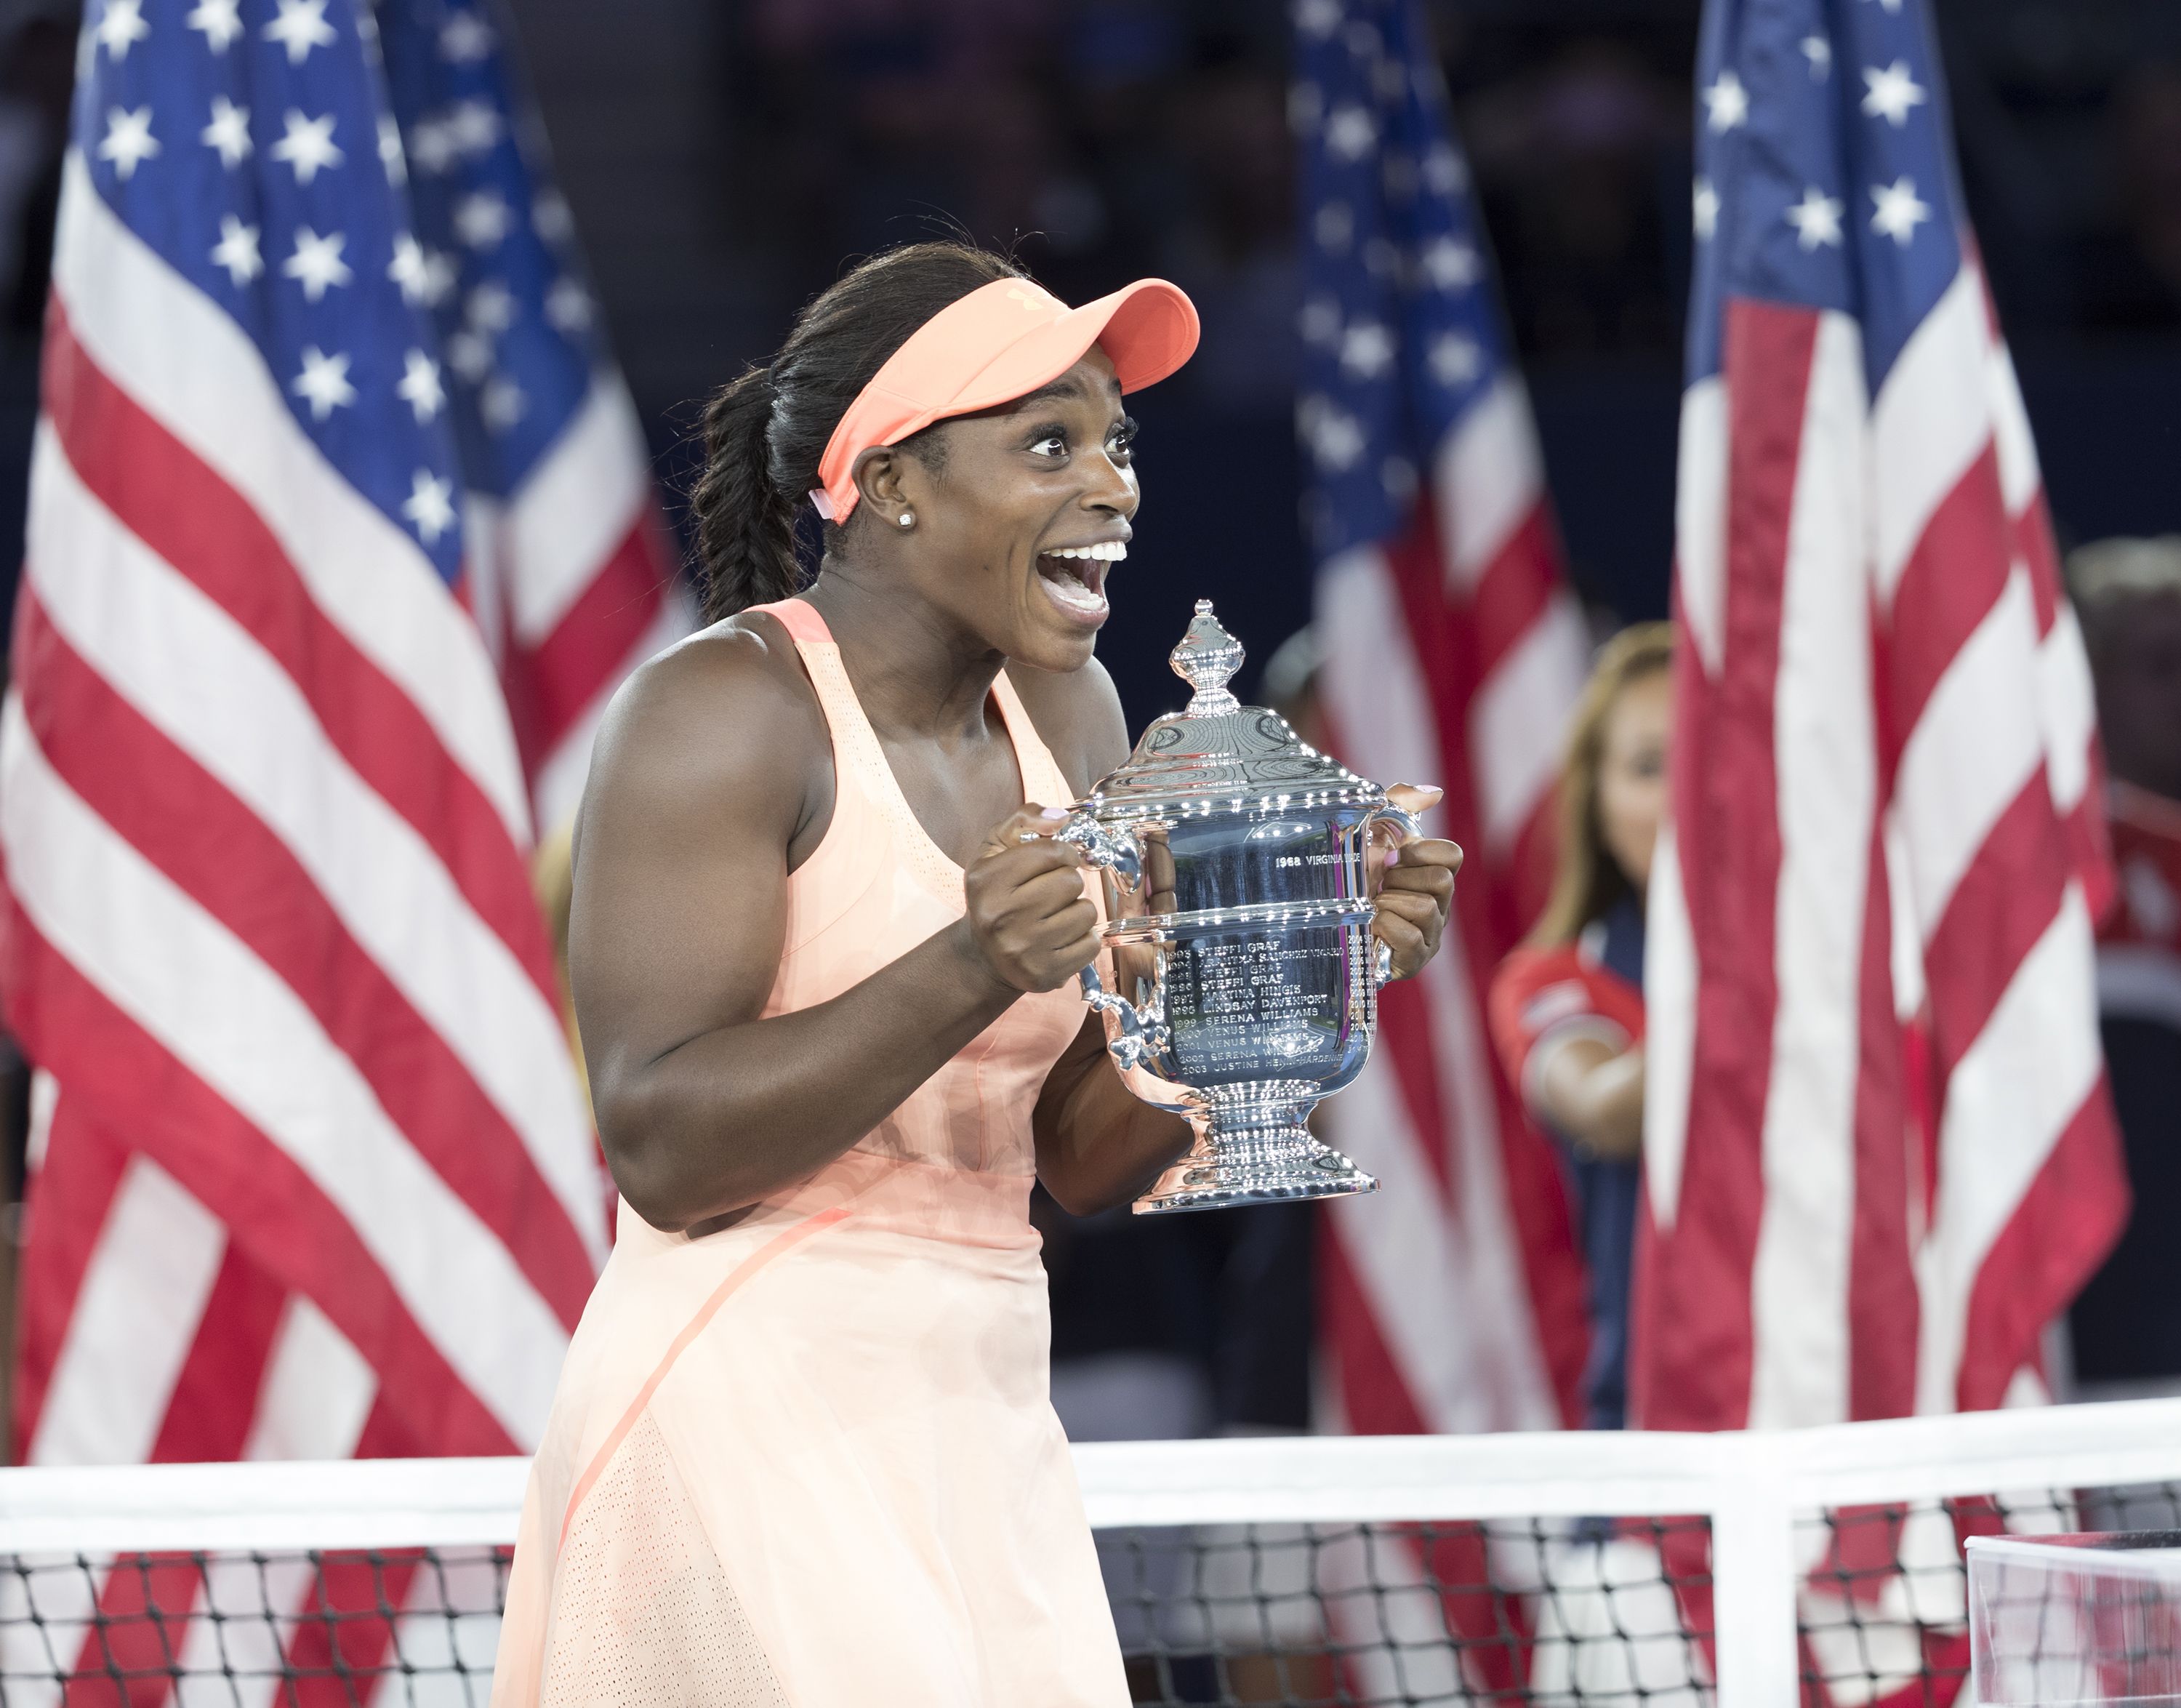 US Open Finals Action: Sloane Stephens' Incredible Comeback - Gildshire3000 x 2349